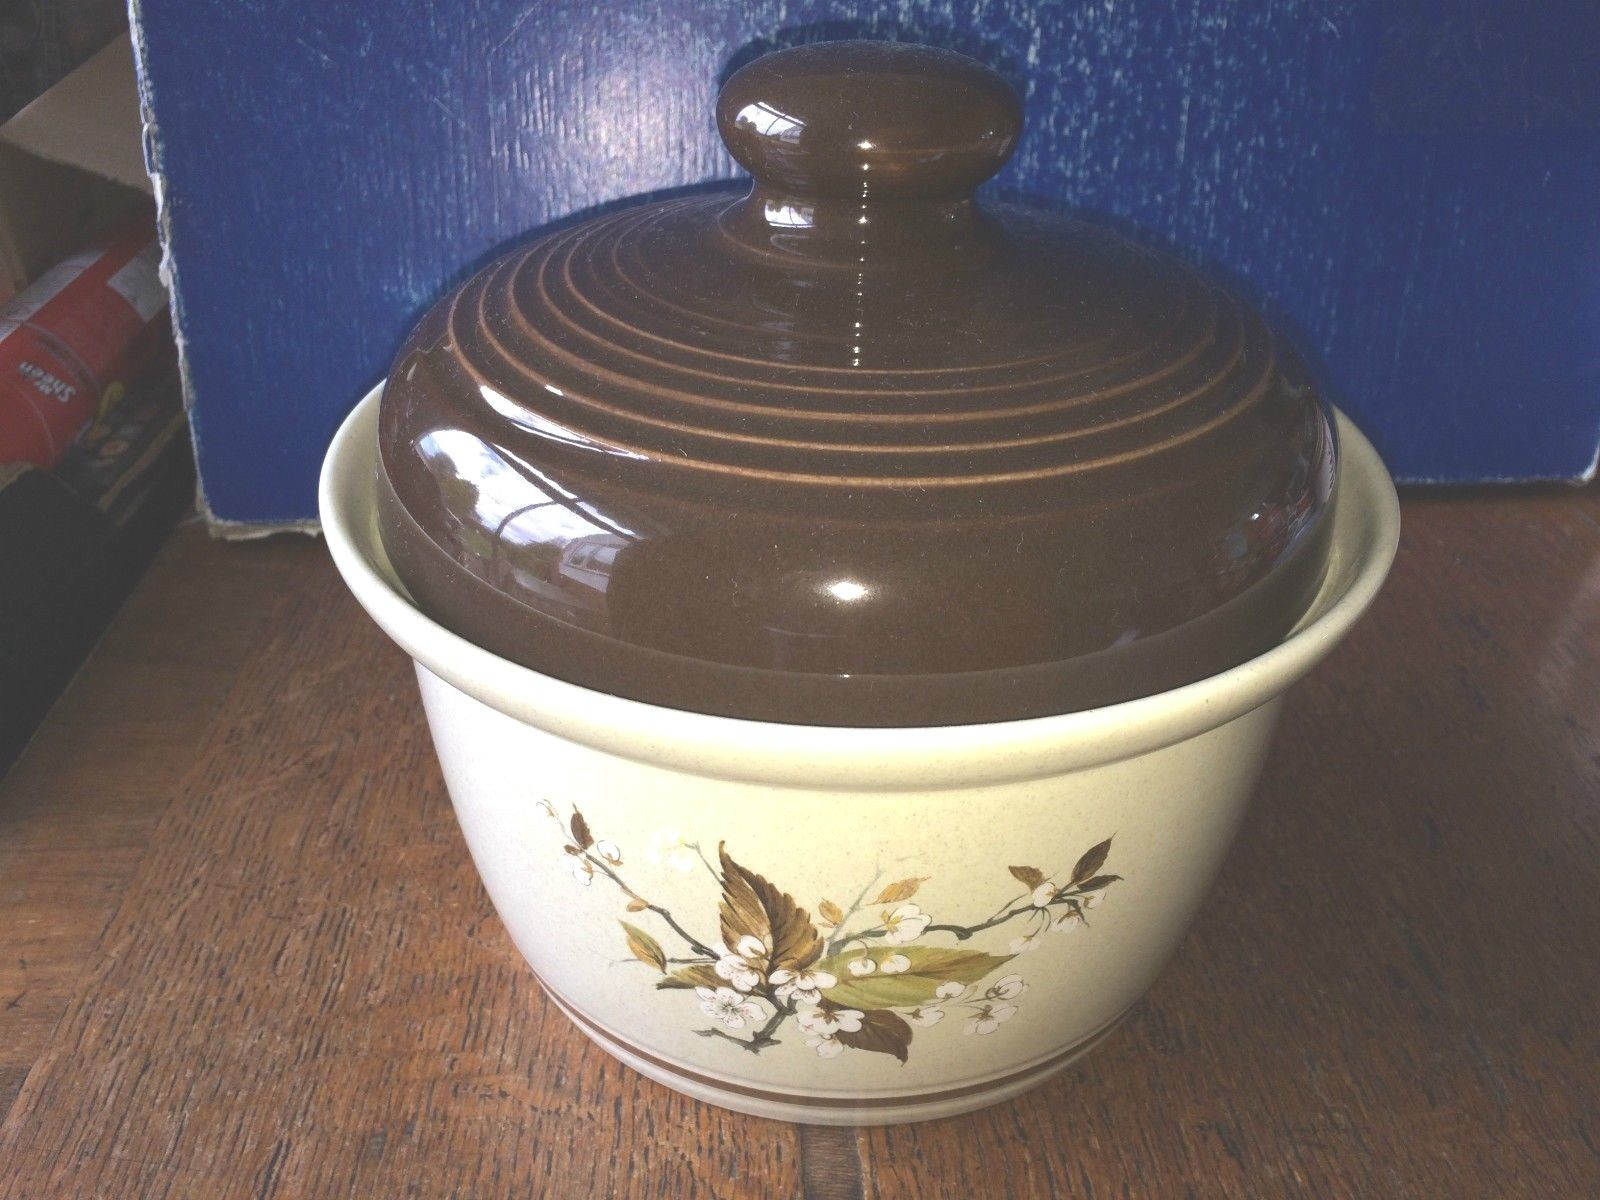 15 Amazing Royal Doulton Vases 1920 2024 free download royal doulton vases 1920 of royal doulton wild cherry large casserole dish lid ls 1038 21cm inside 1 of 9 see more